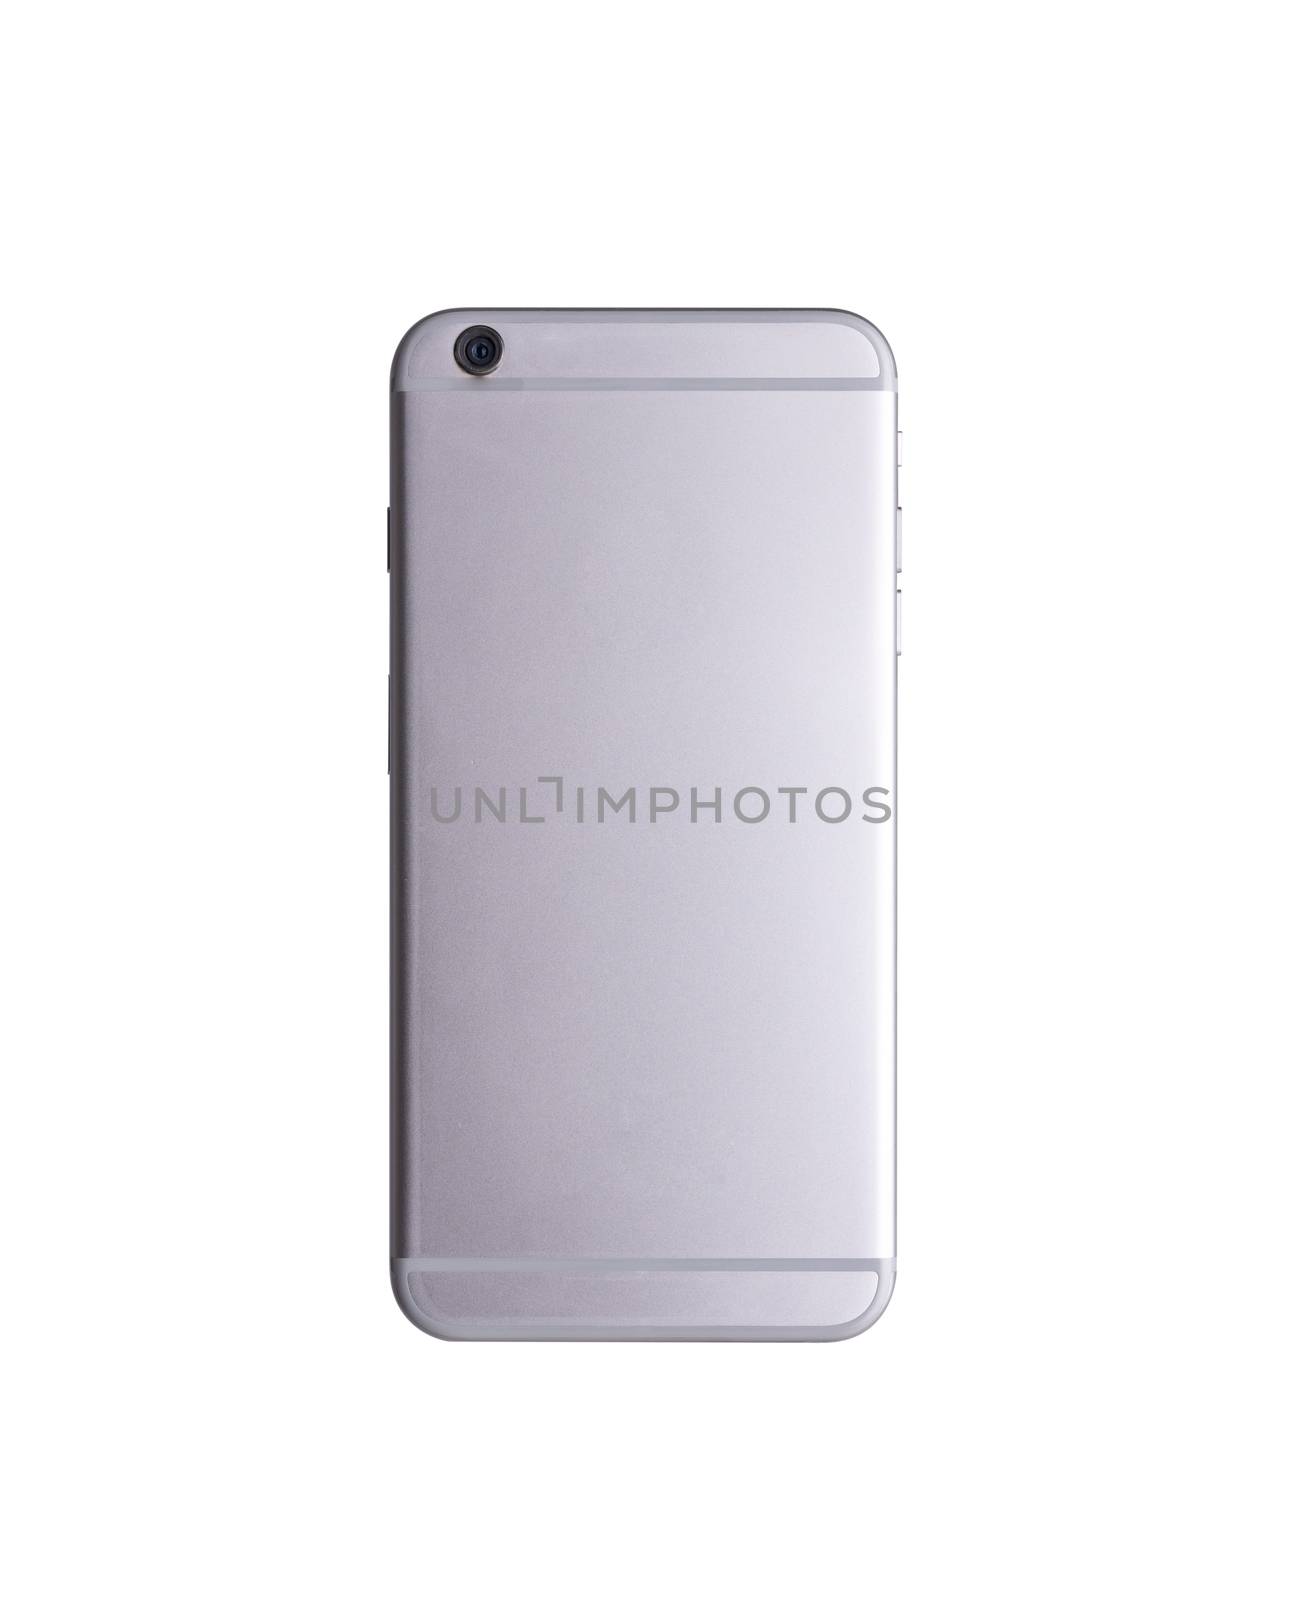 Backside view modern smartphone mockup. Back mobile smart phone technology studio shot isolated on over white background with clipping mask path on the phone